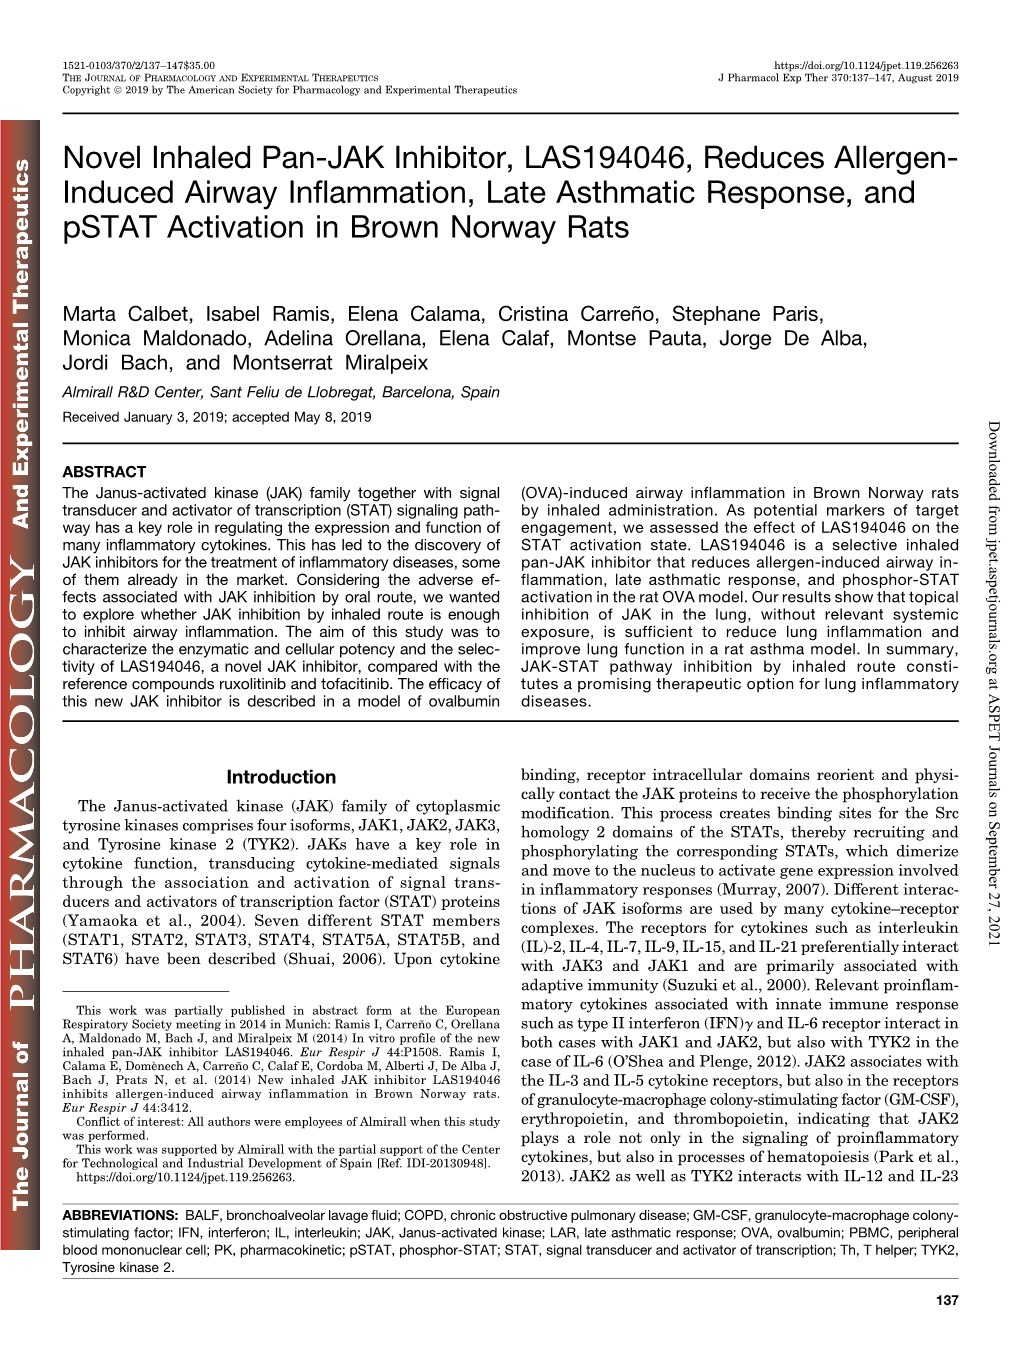 Novel Inhaled Pan-JAK Inhibitor, LAS194046, Reduces Allergen- Induced Airway Inflammation, Late Asthmatic Response, and Pstat Activation in Brown Norway Rats